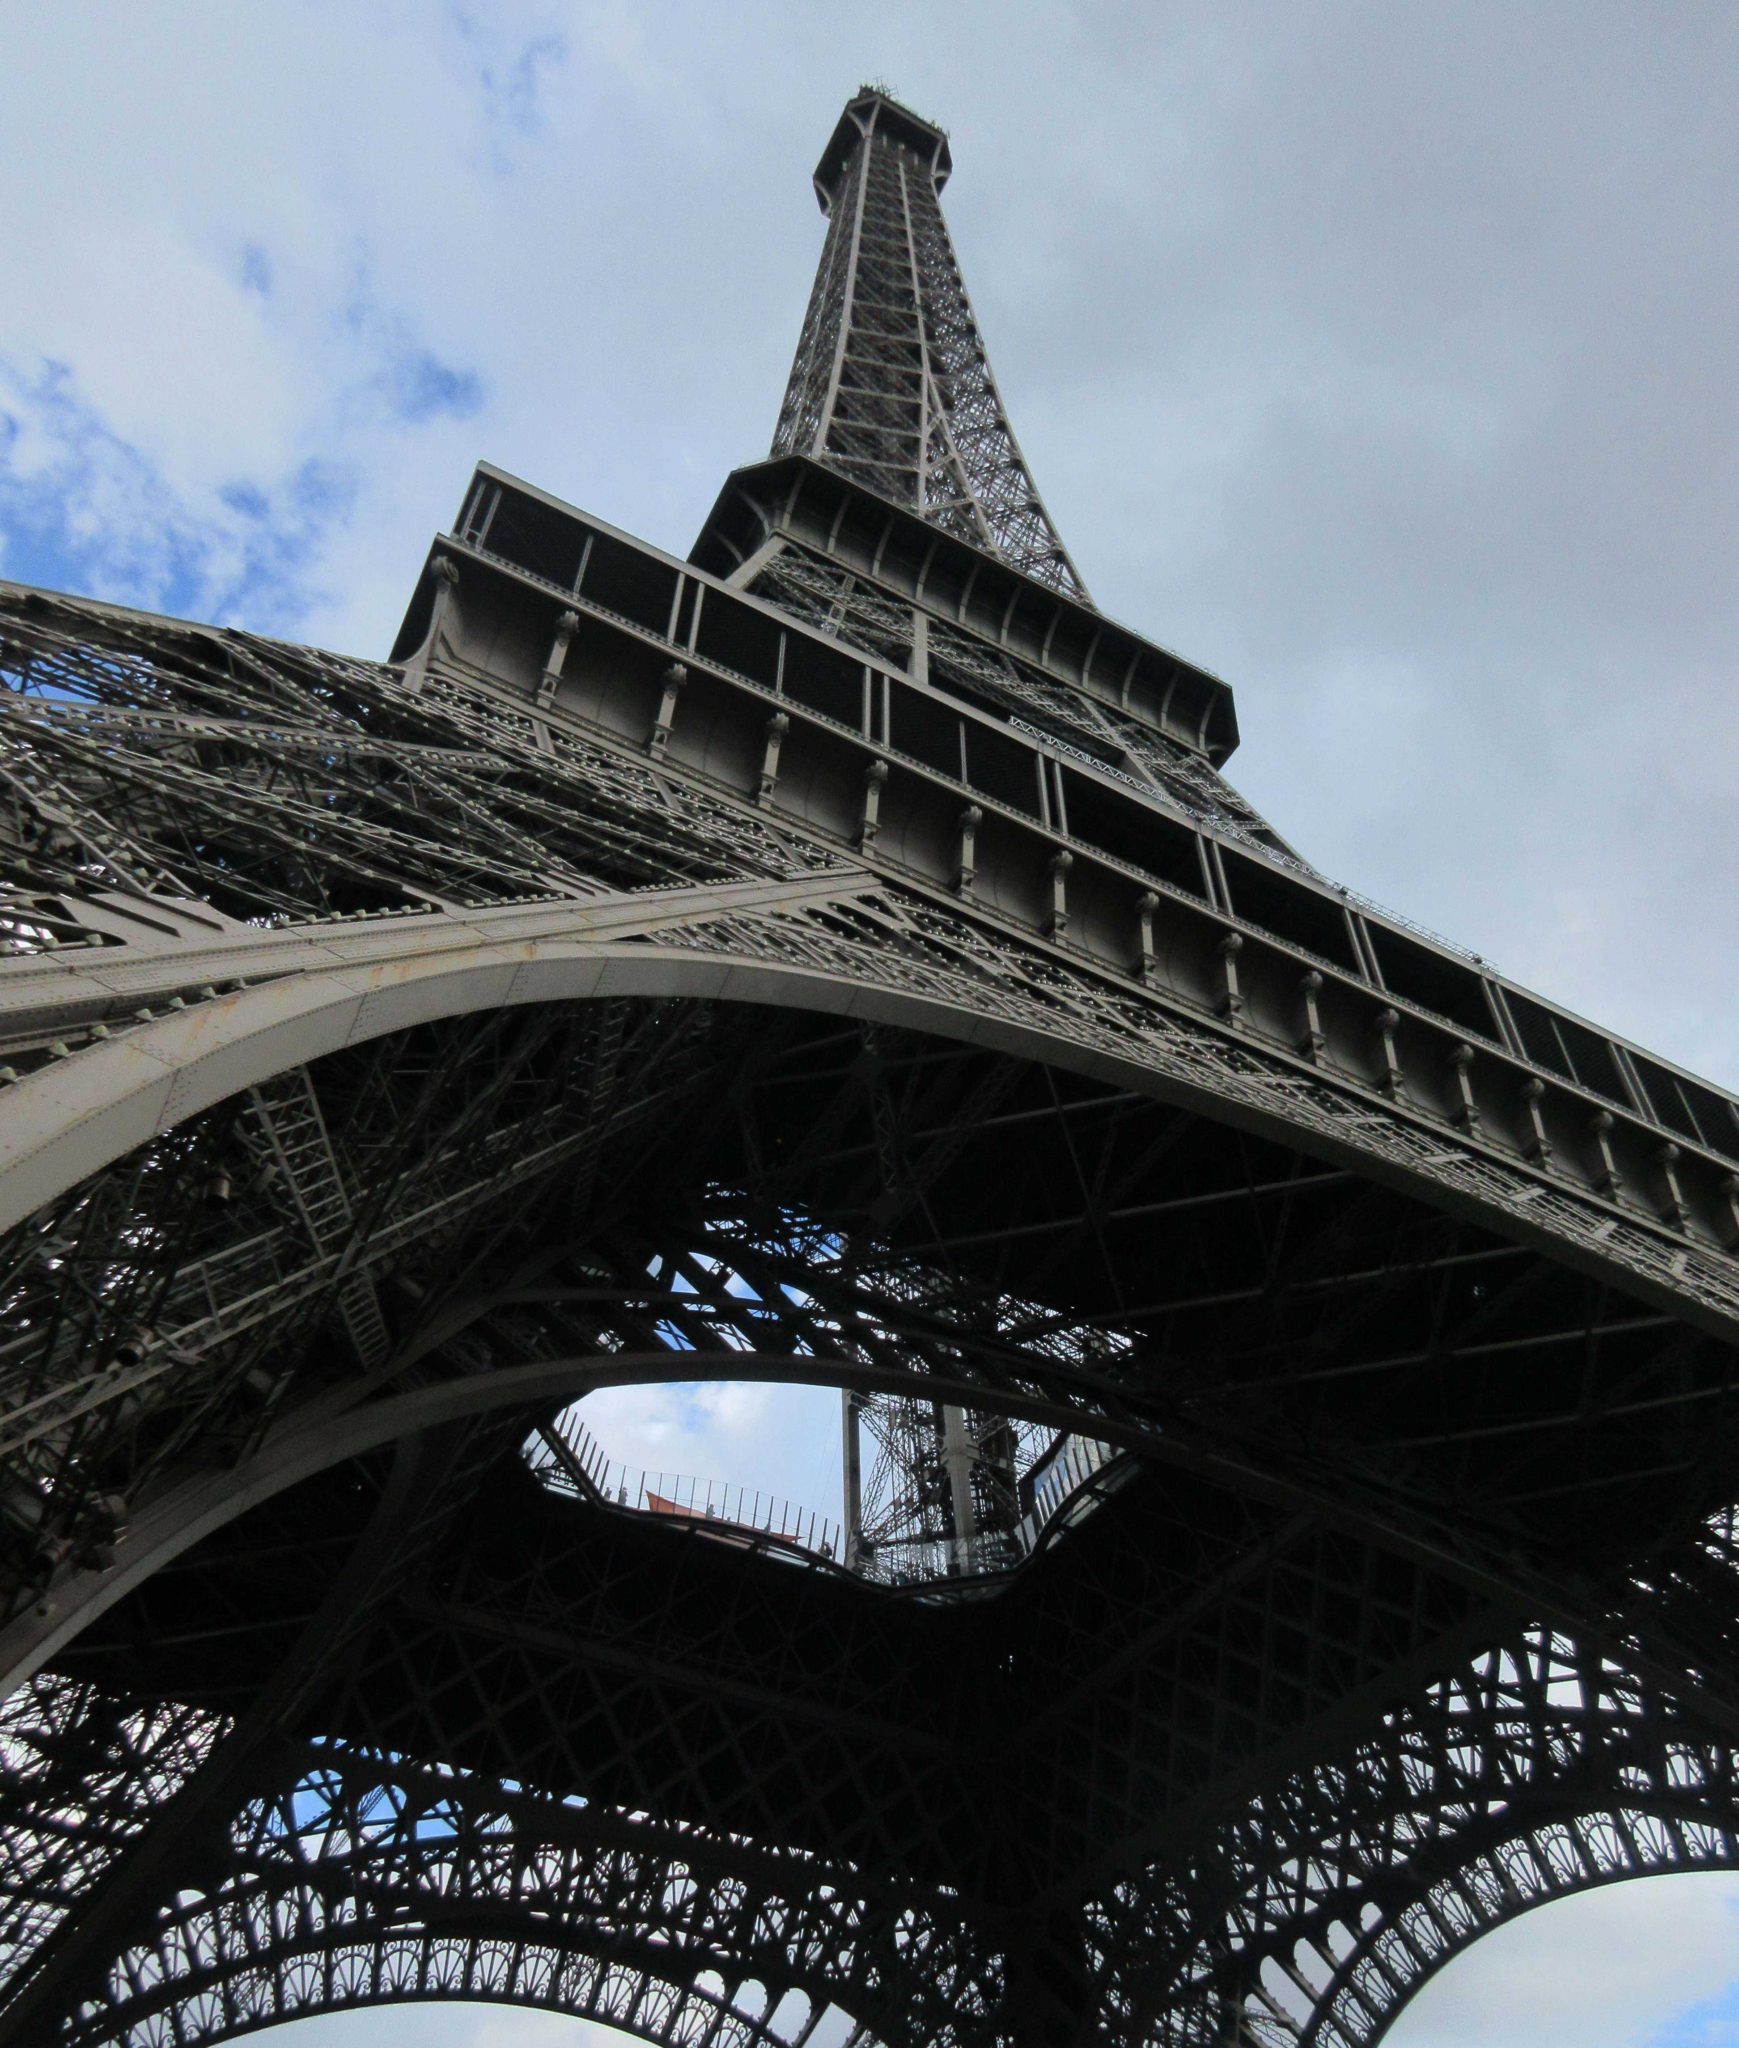 Visiting the Eiffel Tower: Highlights and Tips